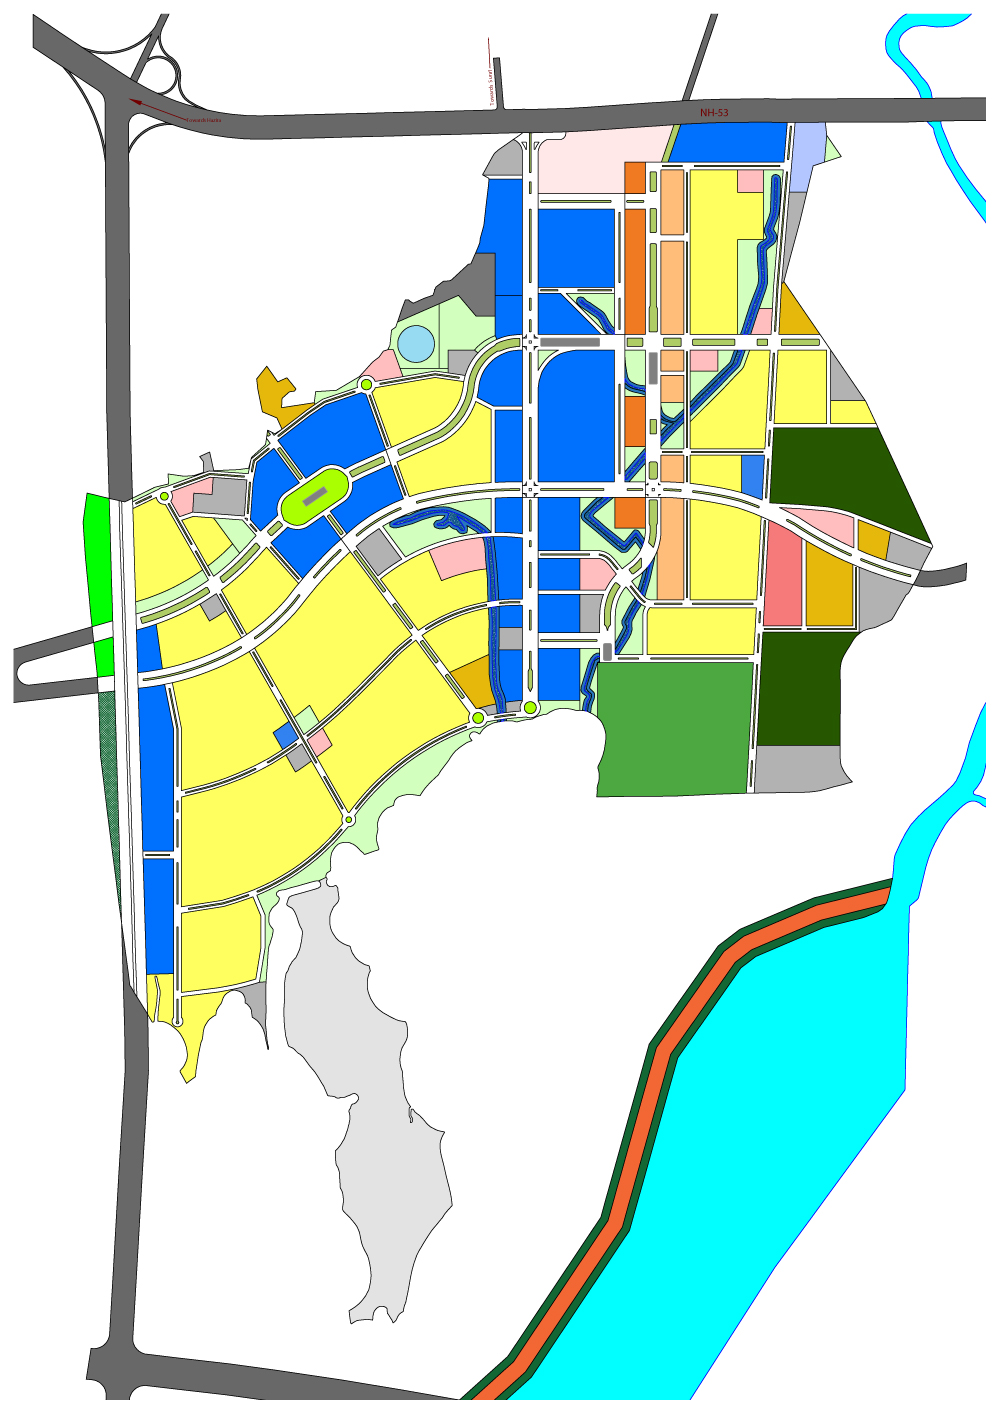 Land-Use in DREAM City